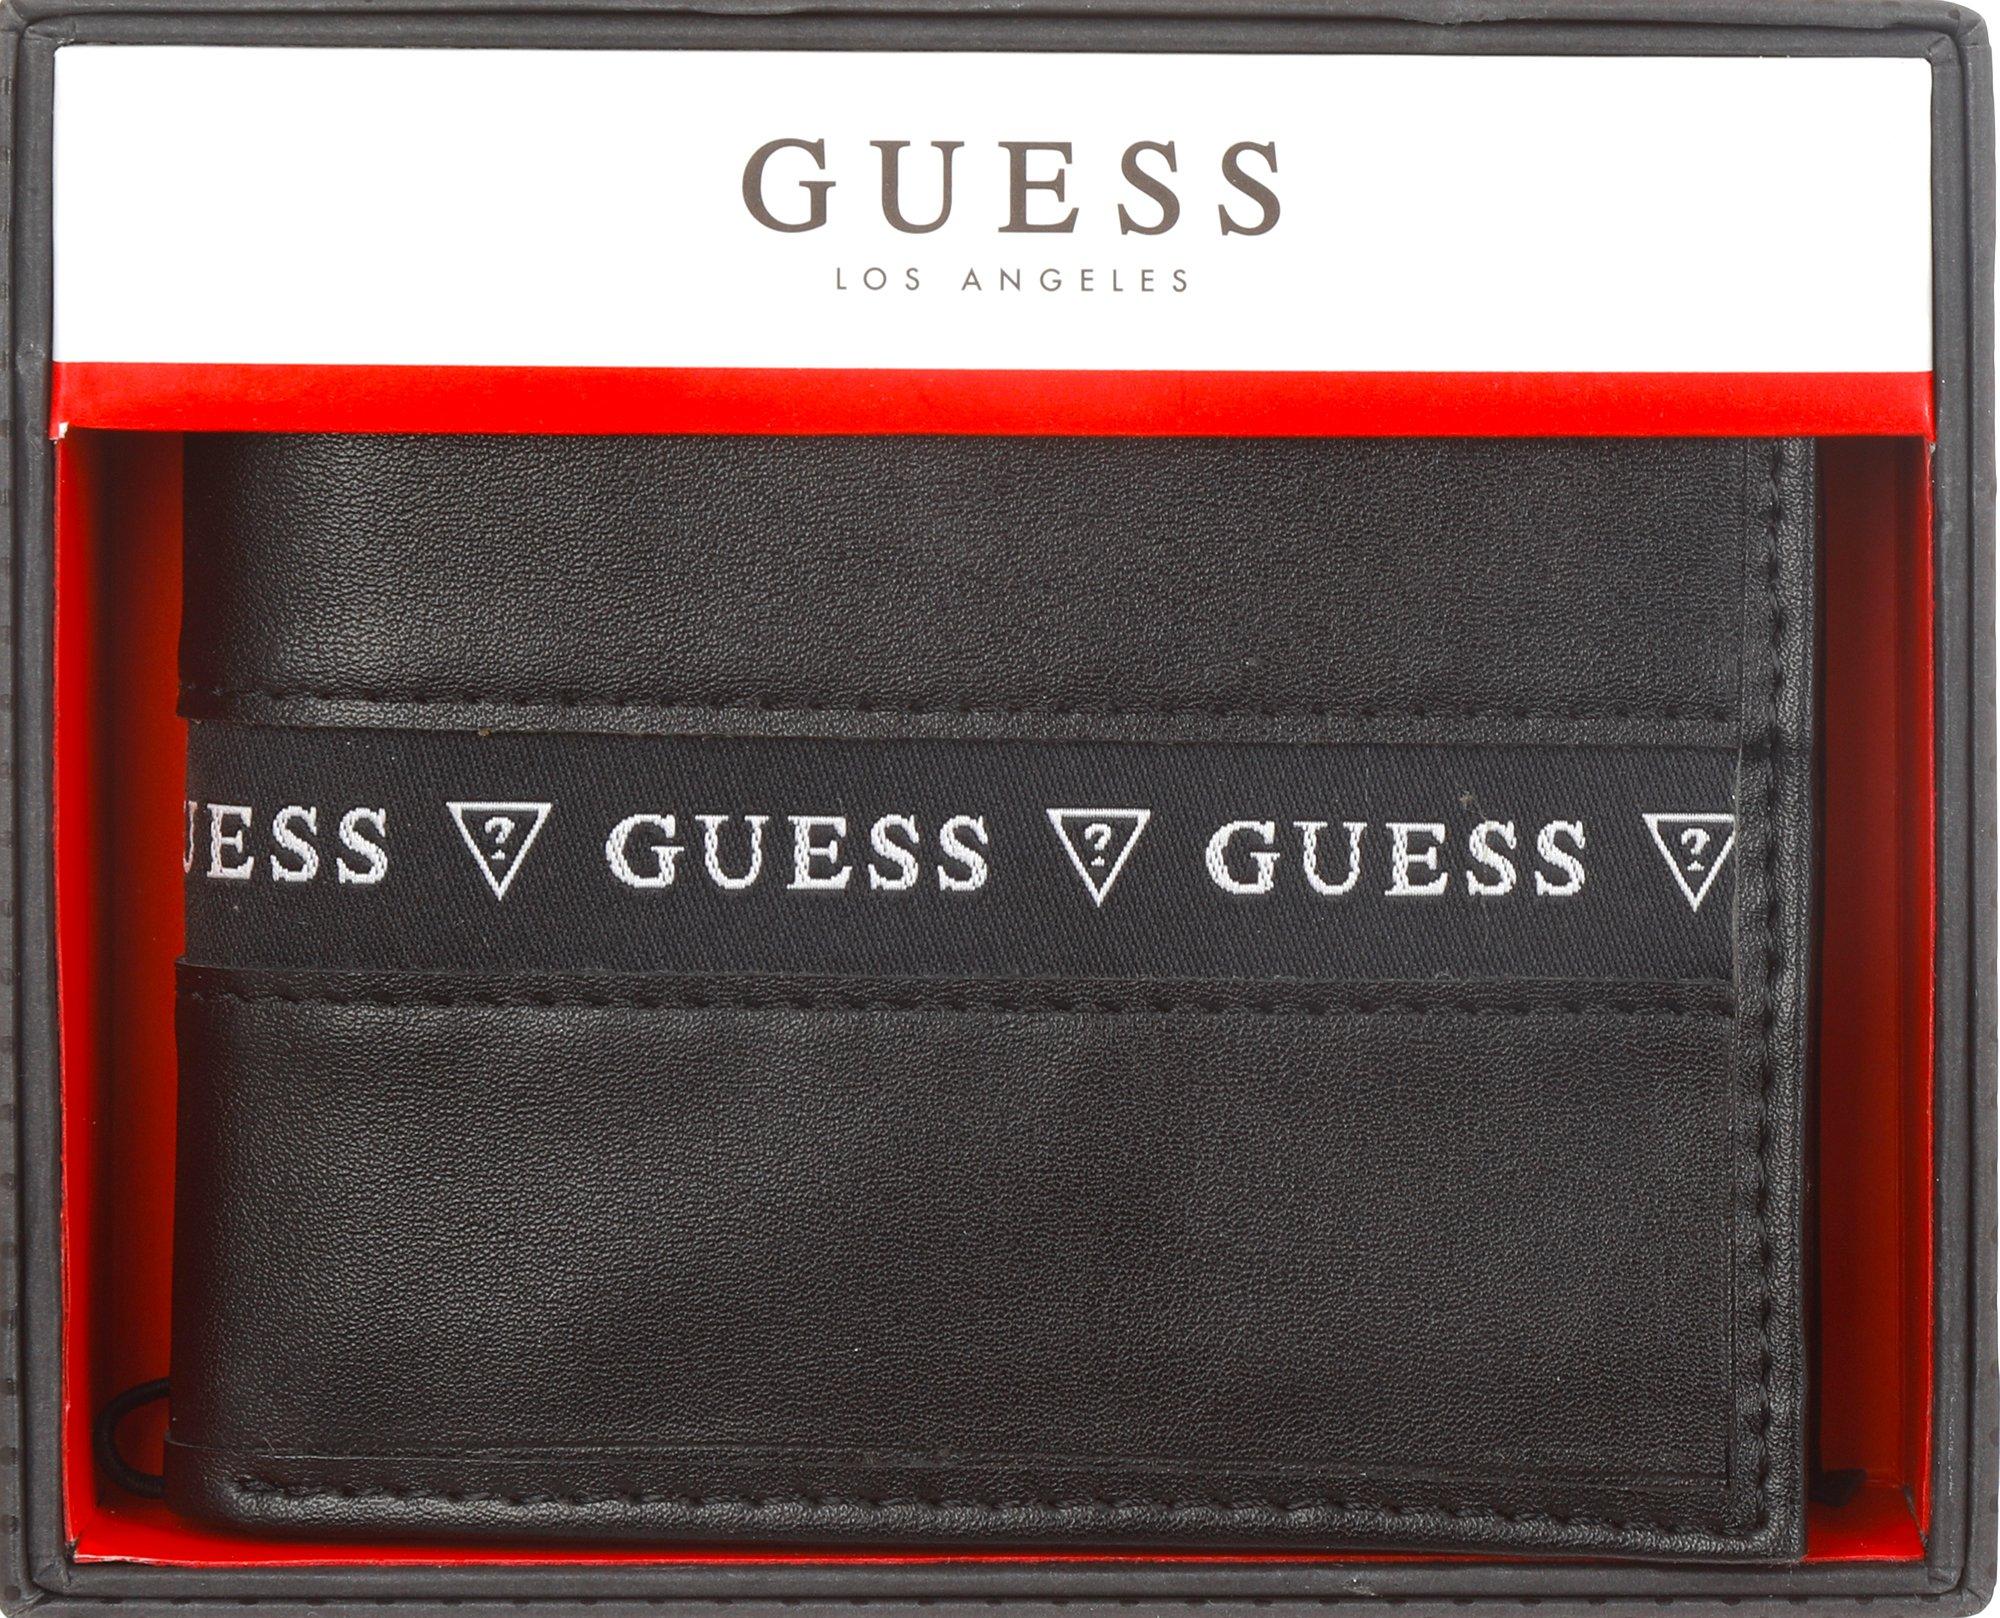 Guess 3 Fold Wallet, Men's Fashion, Watches & Accessories, Wallets